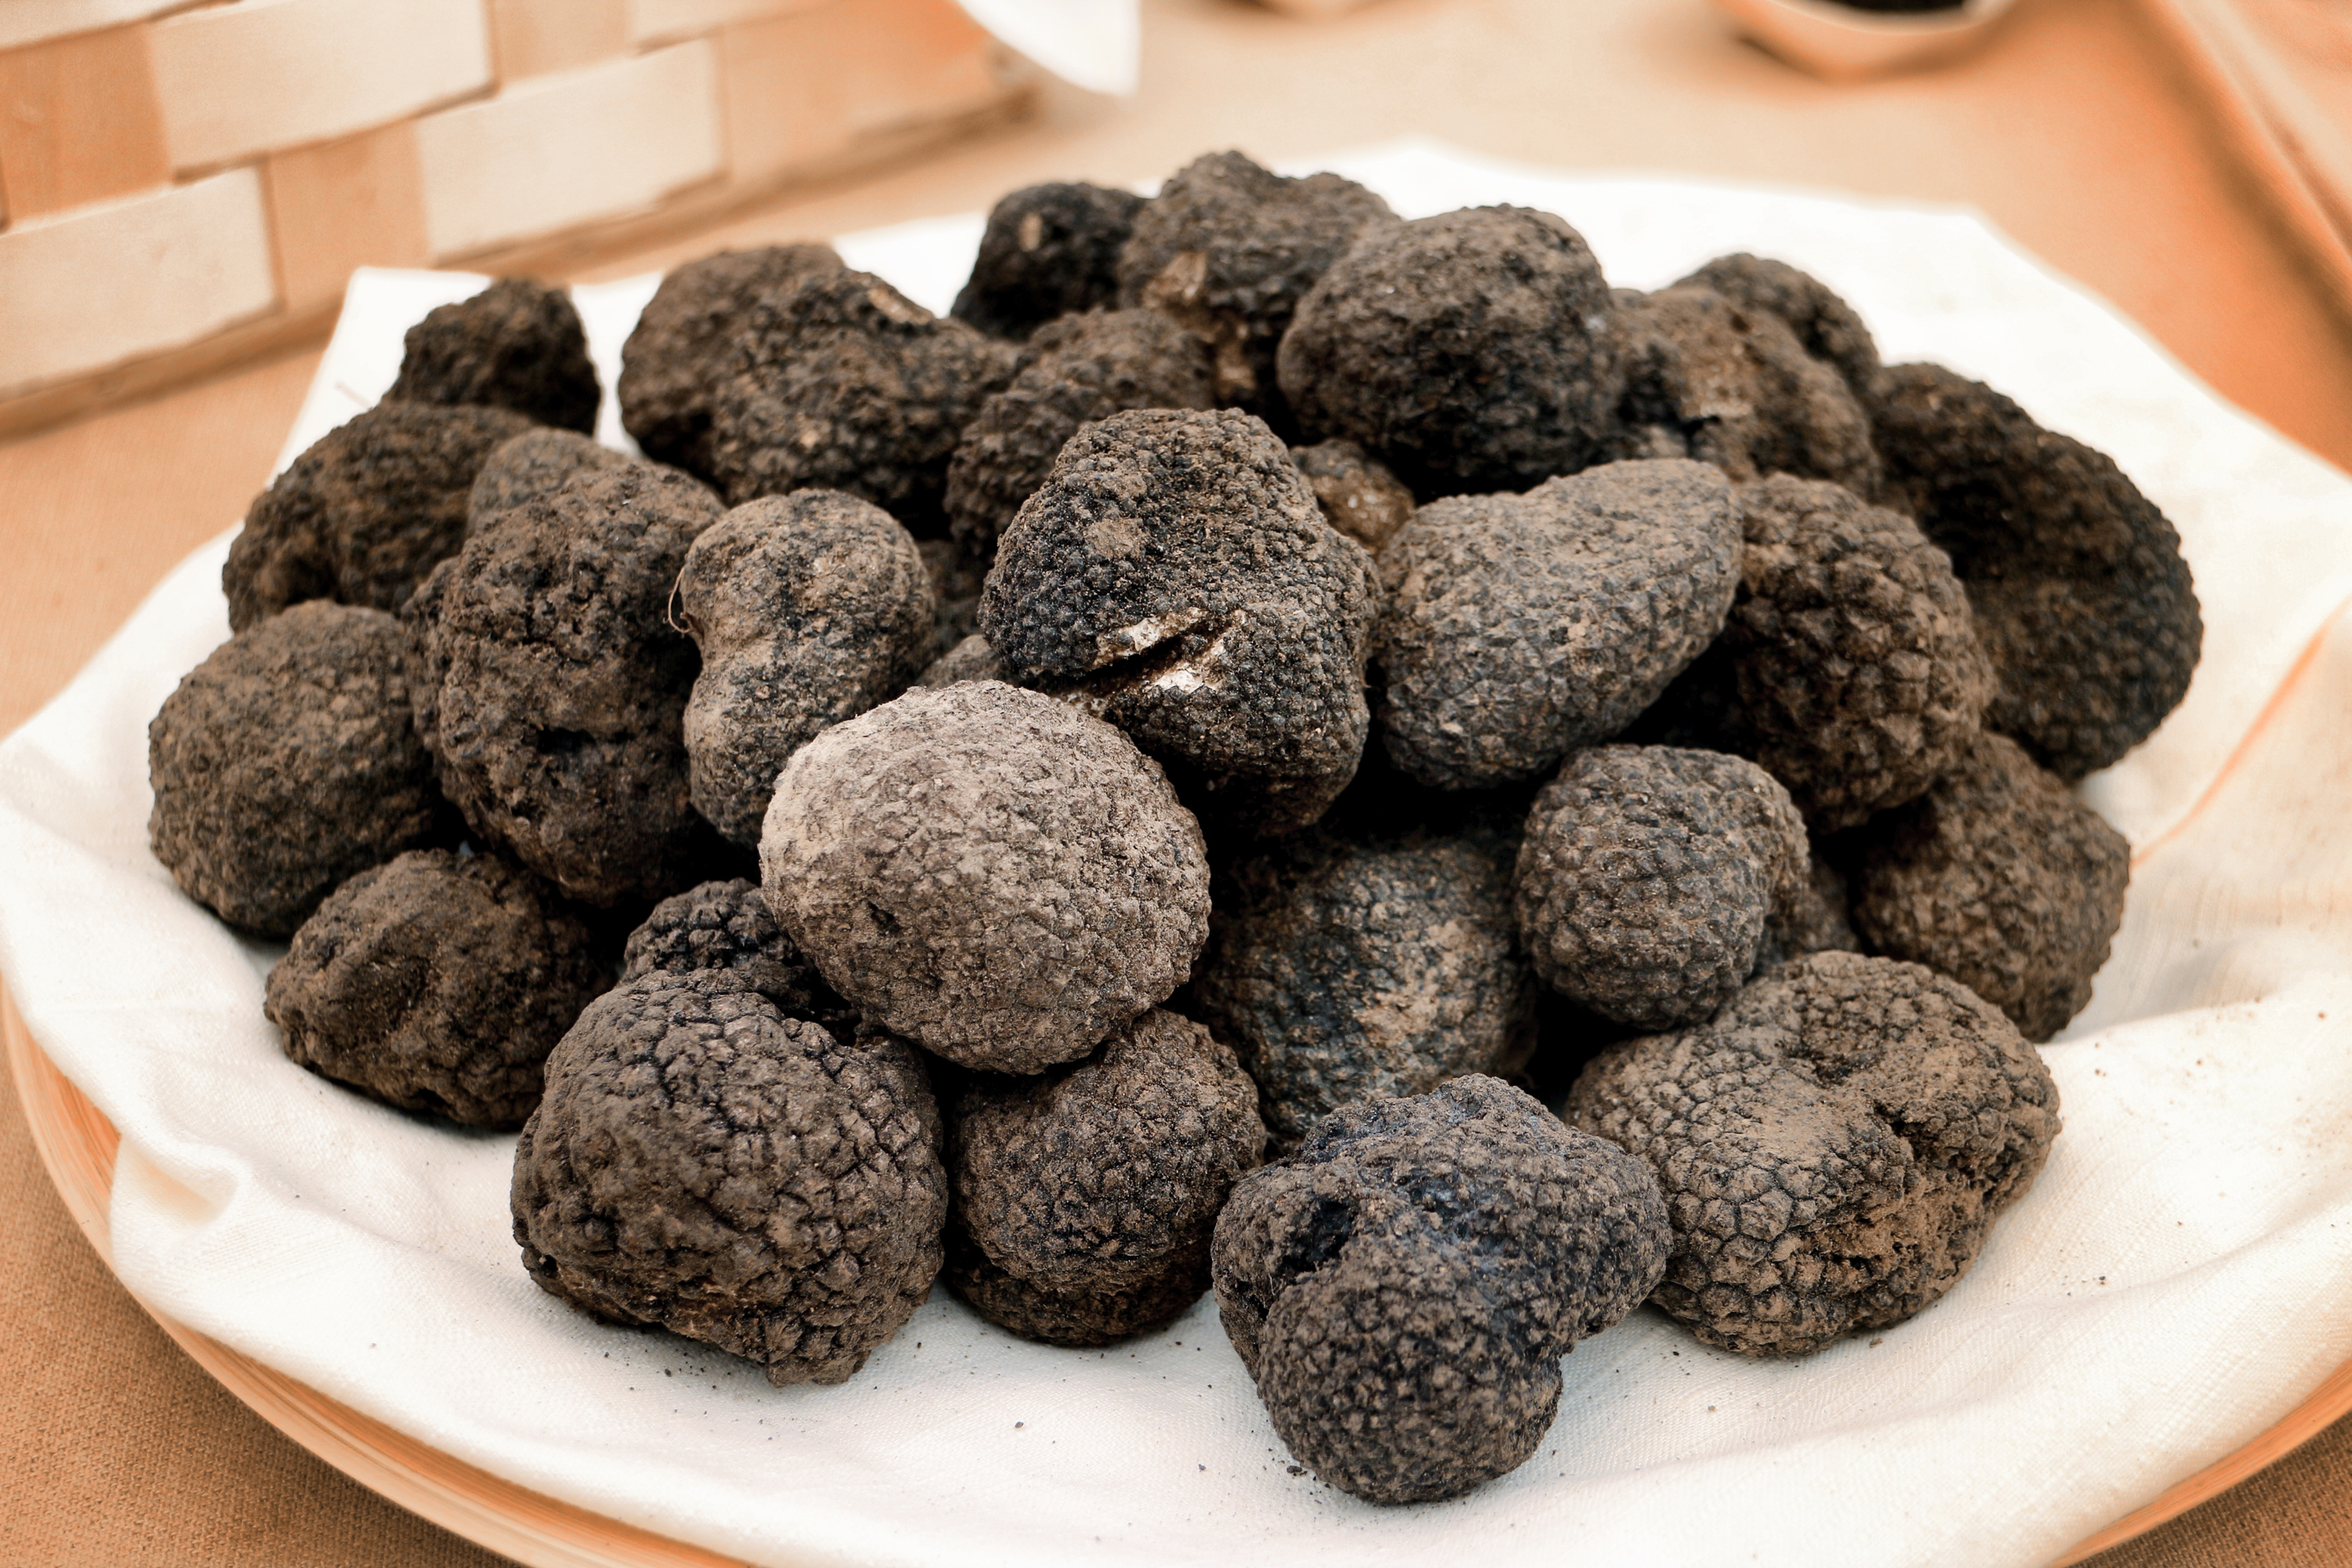 Black Truffle Products